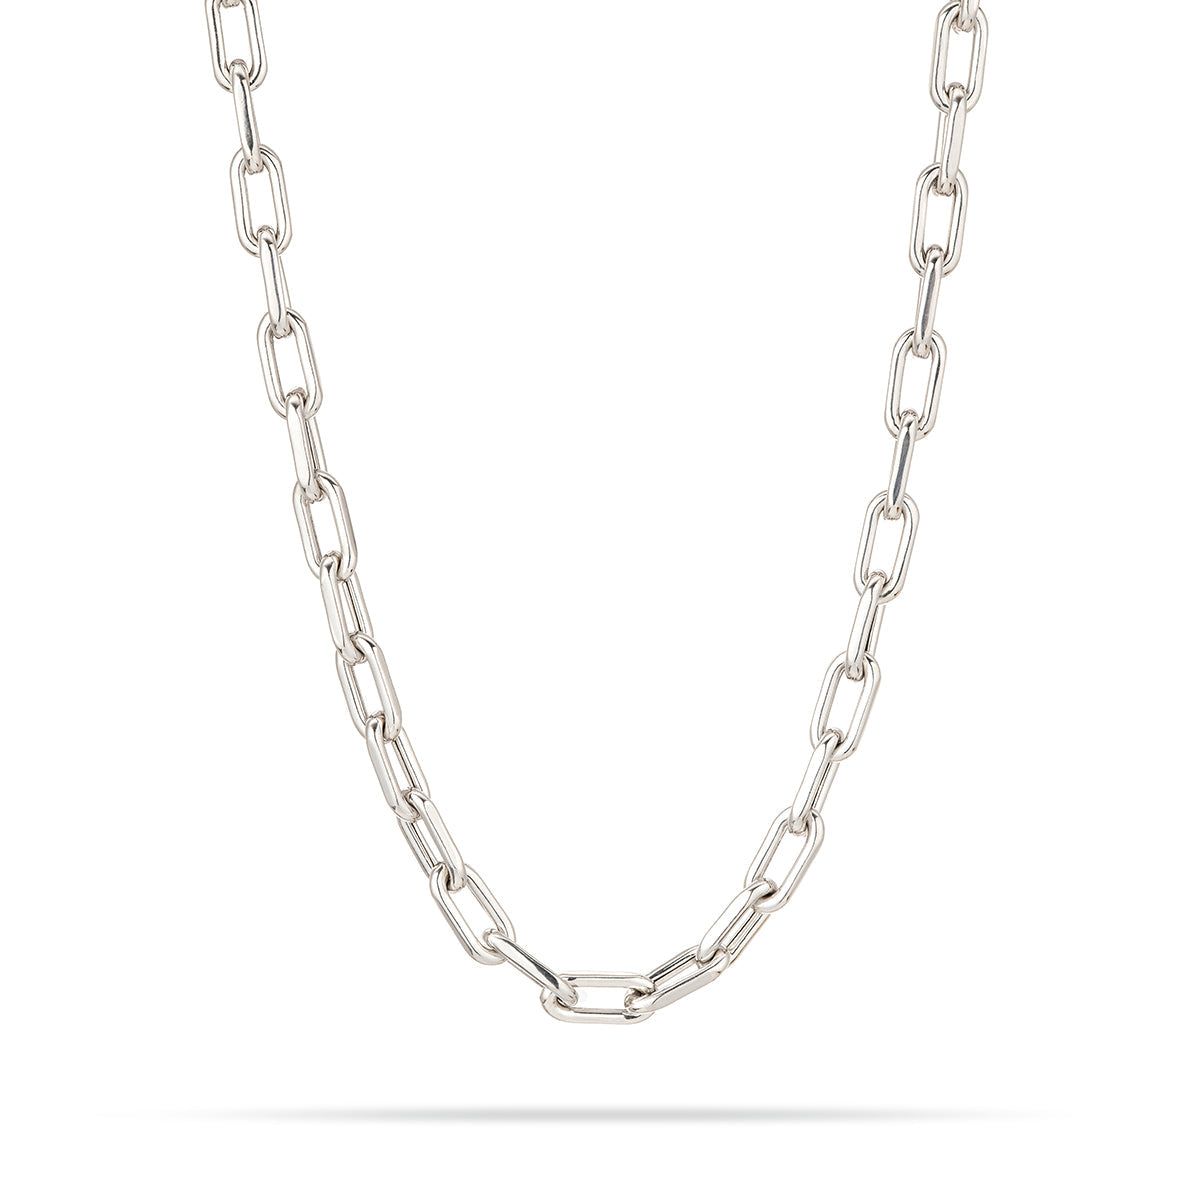 5.3mm Italian Chain Link Necklace in Sterling Silver